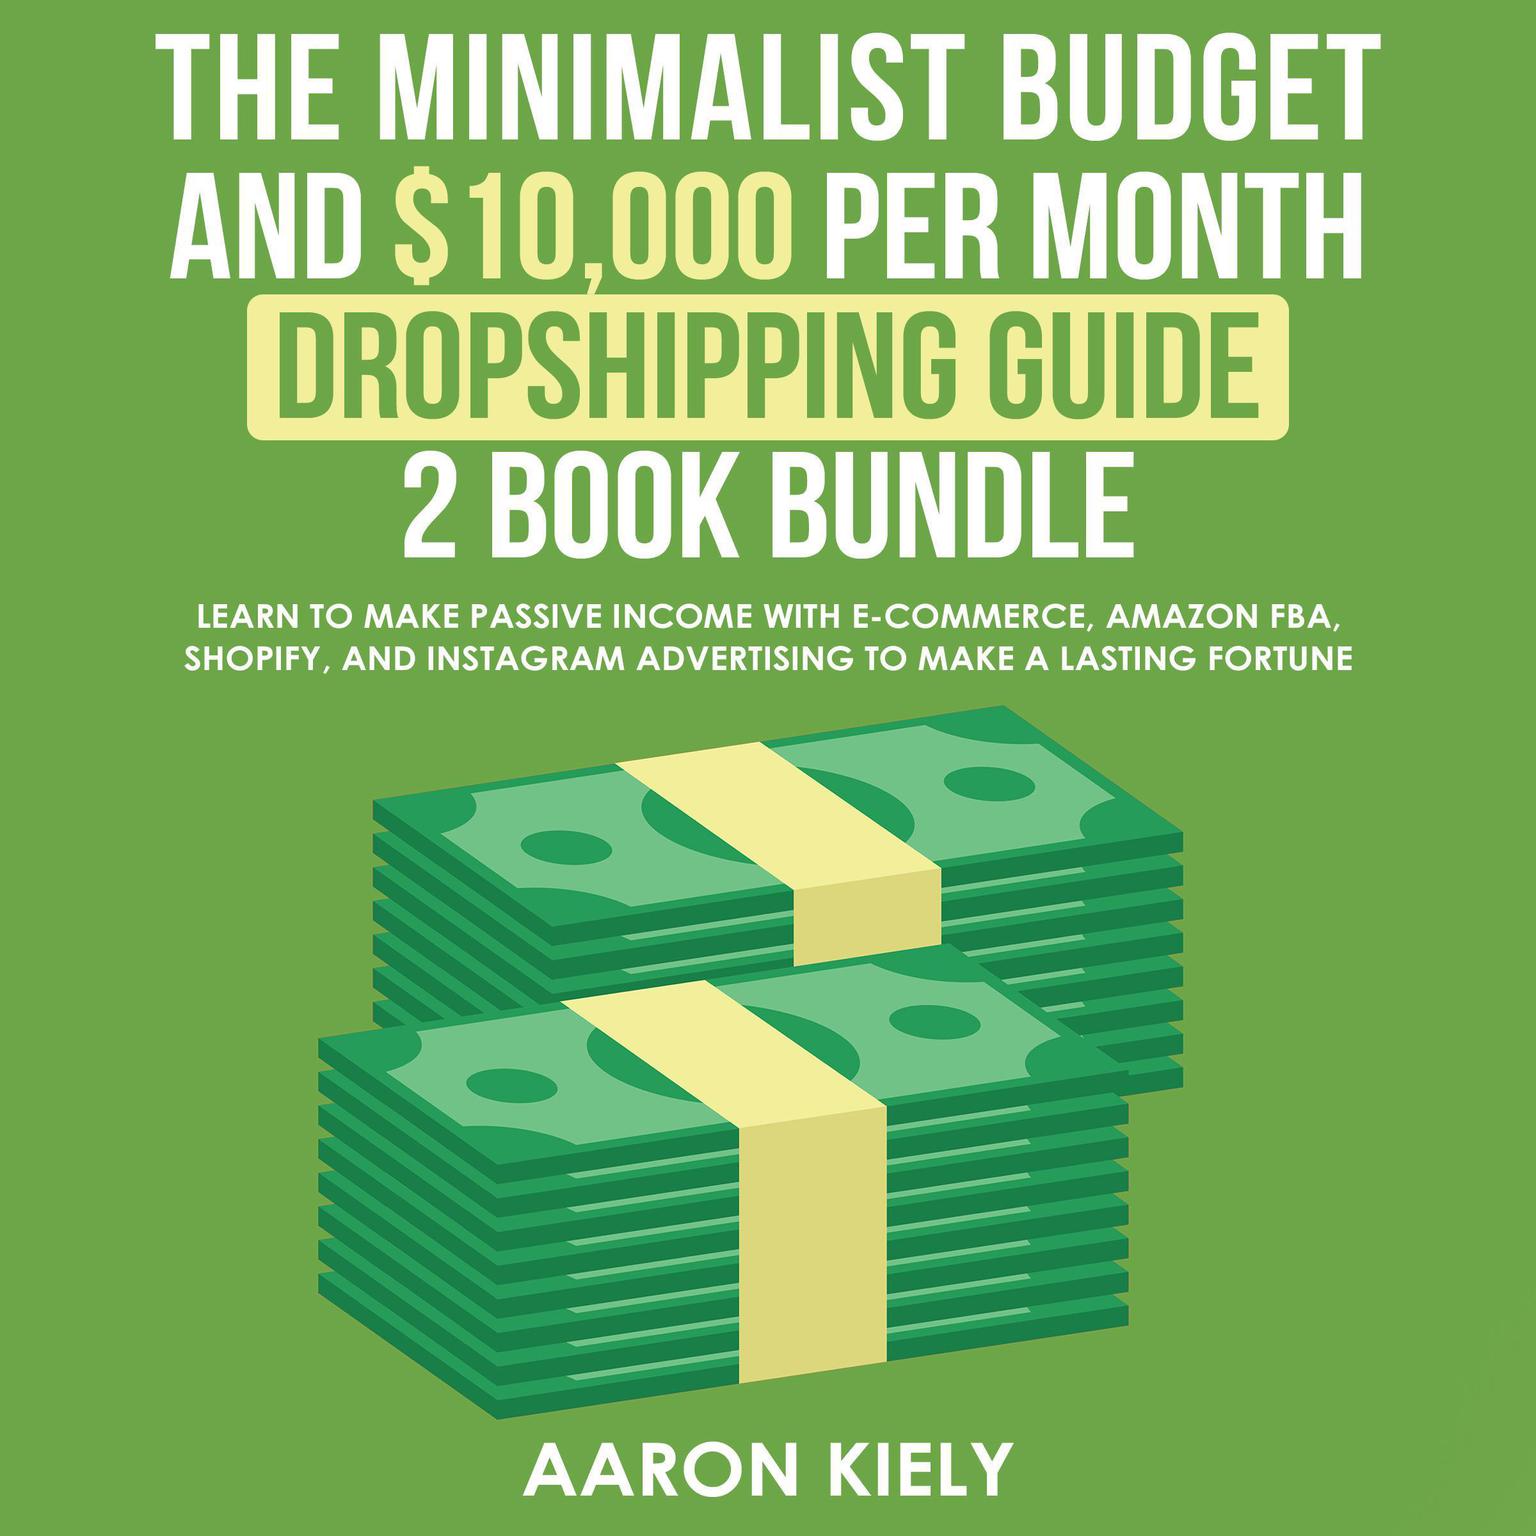 The Minimalist Budget and $10,000 per Month Dropshipping Guide 2 Book Bundle: Learn to Make Passive Income with E-commerce, Amazon FBA, Shopify, and Instagram Advertising to Make a Lasting Fortune Audiobook, by Aaron Kiely